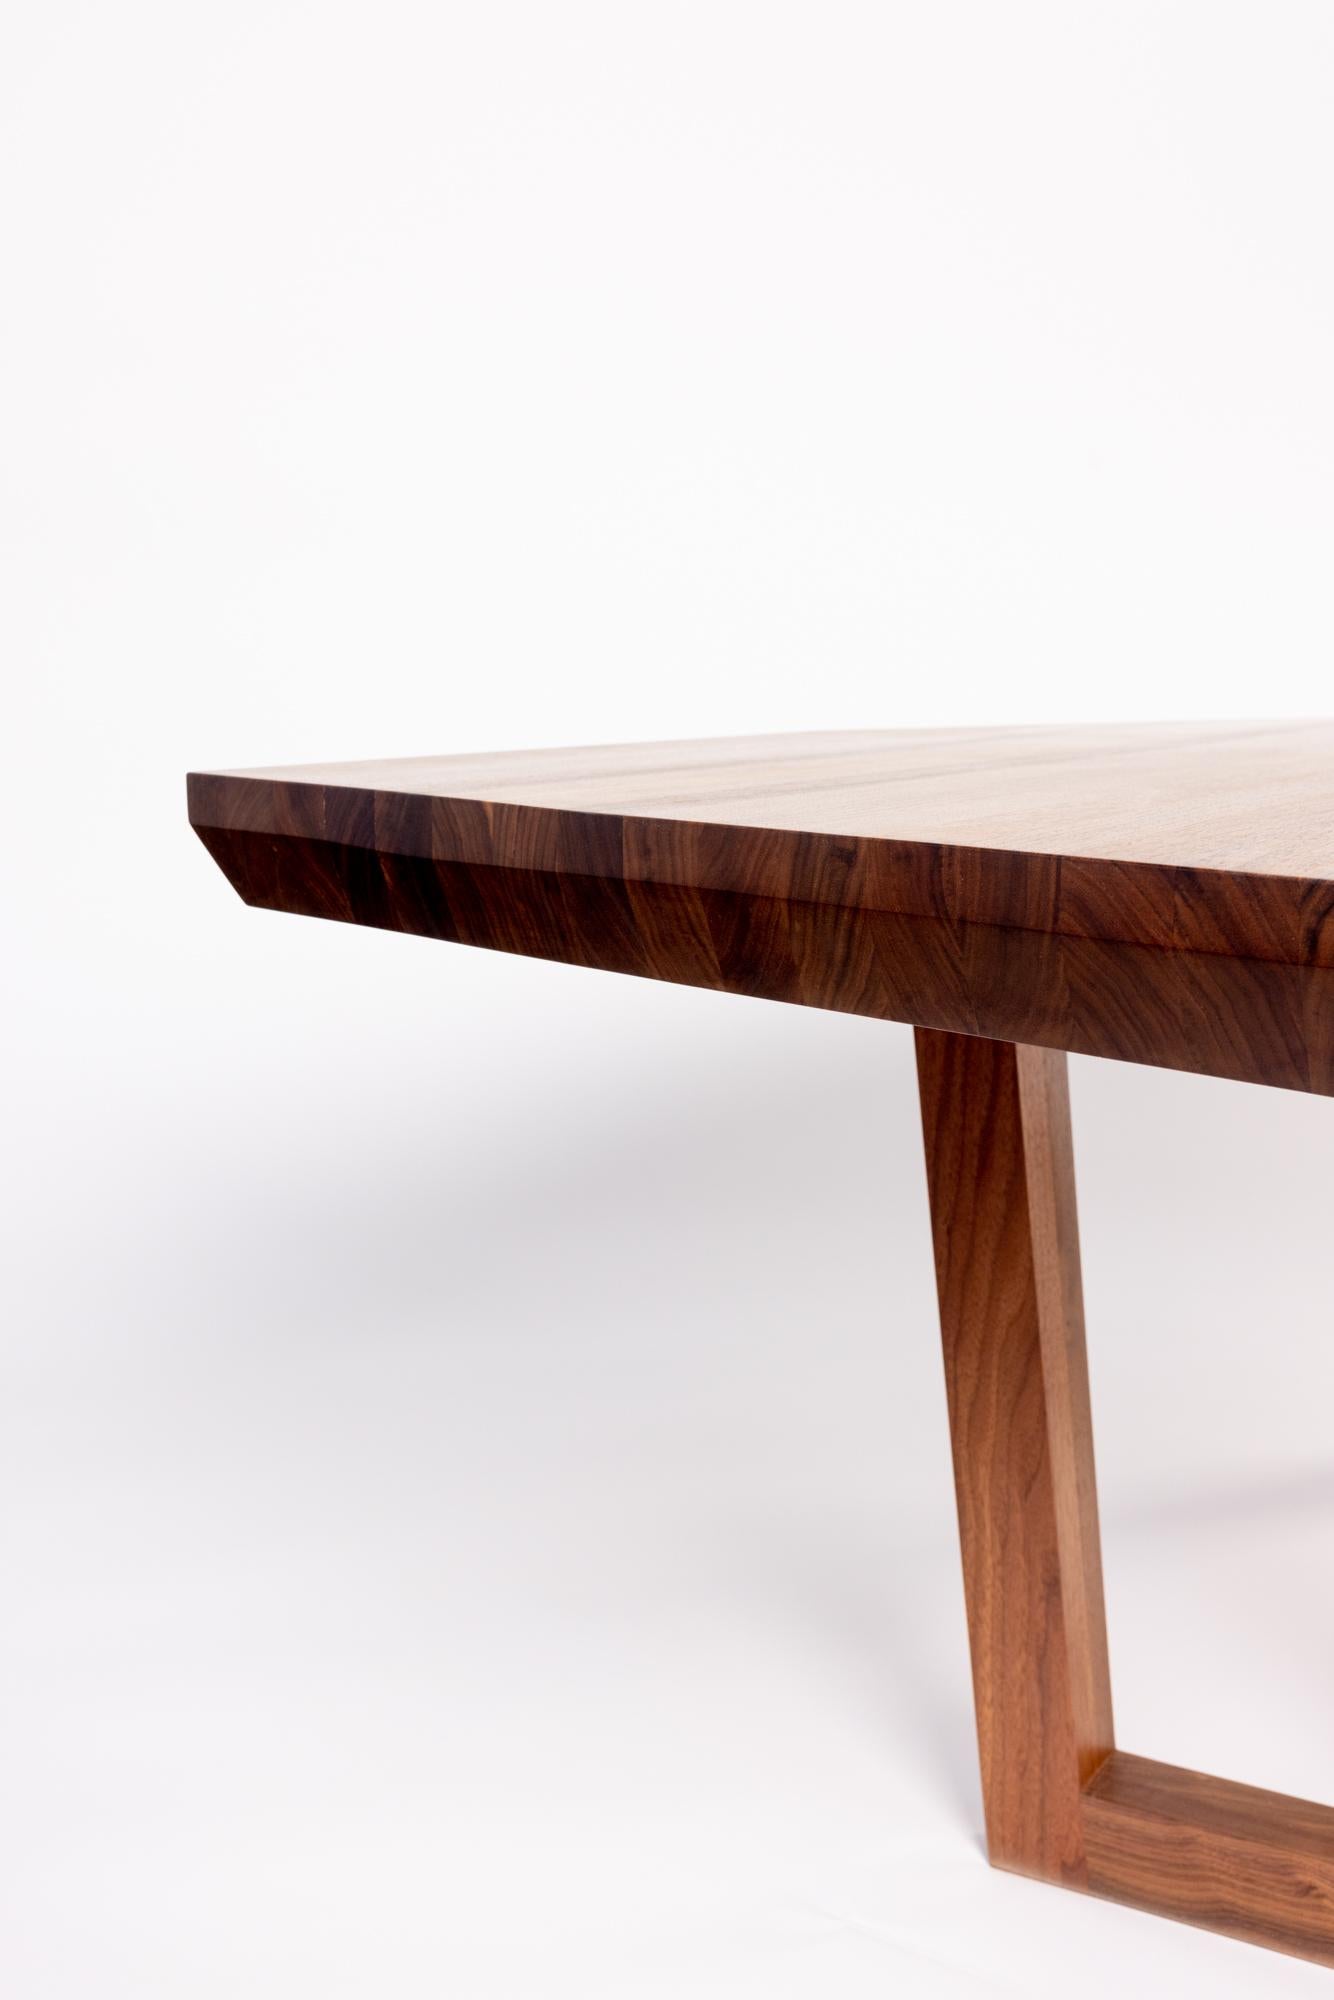 Contemporary Kaiwa Angular Solid Walnut Dining Table by Autonomous Furniture For Sale